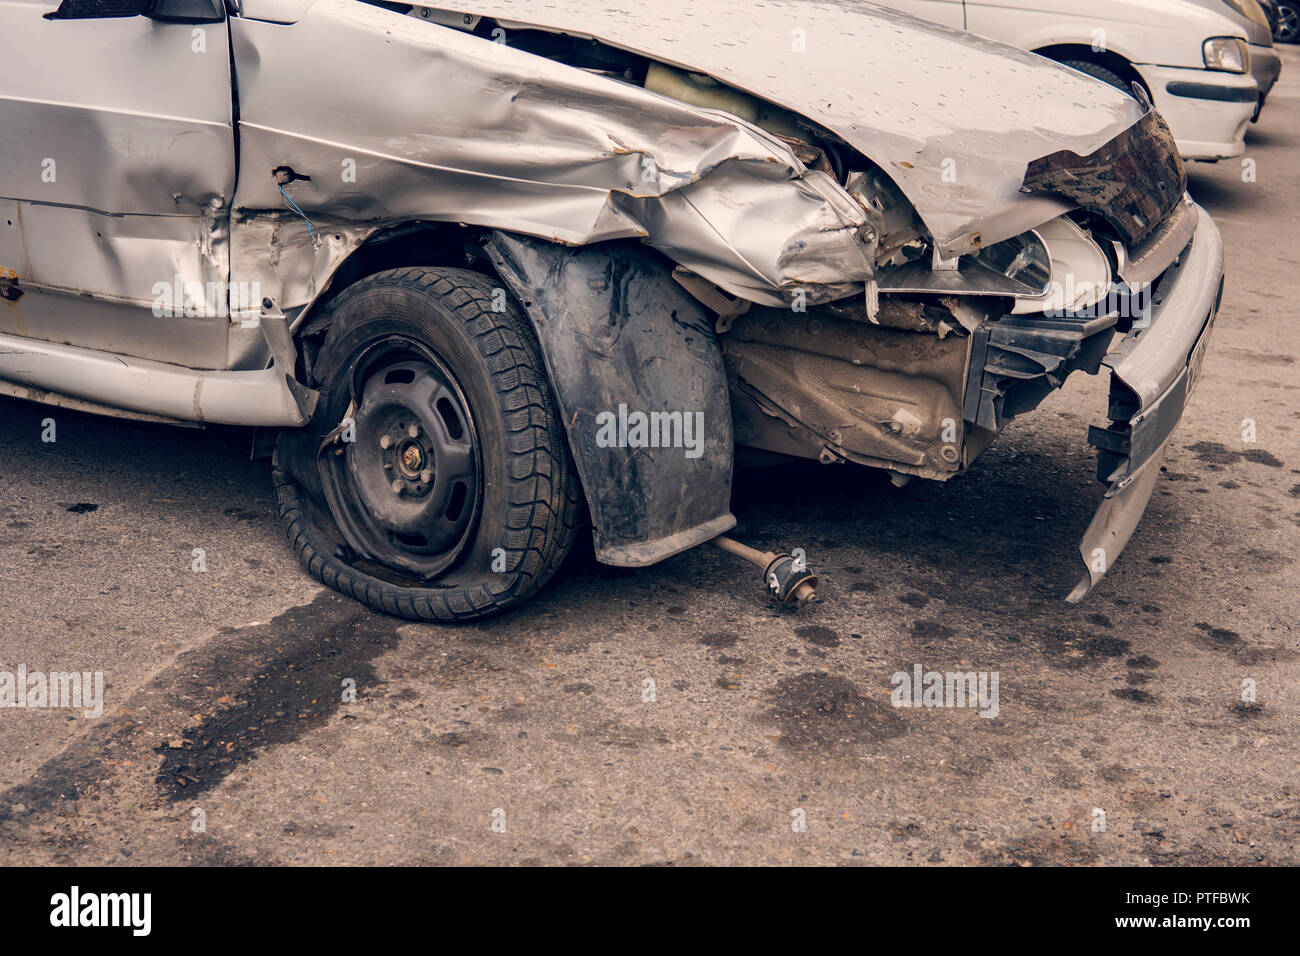 Many broken cars after a traffic accident in the parking lot of a